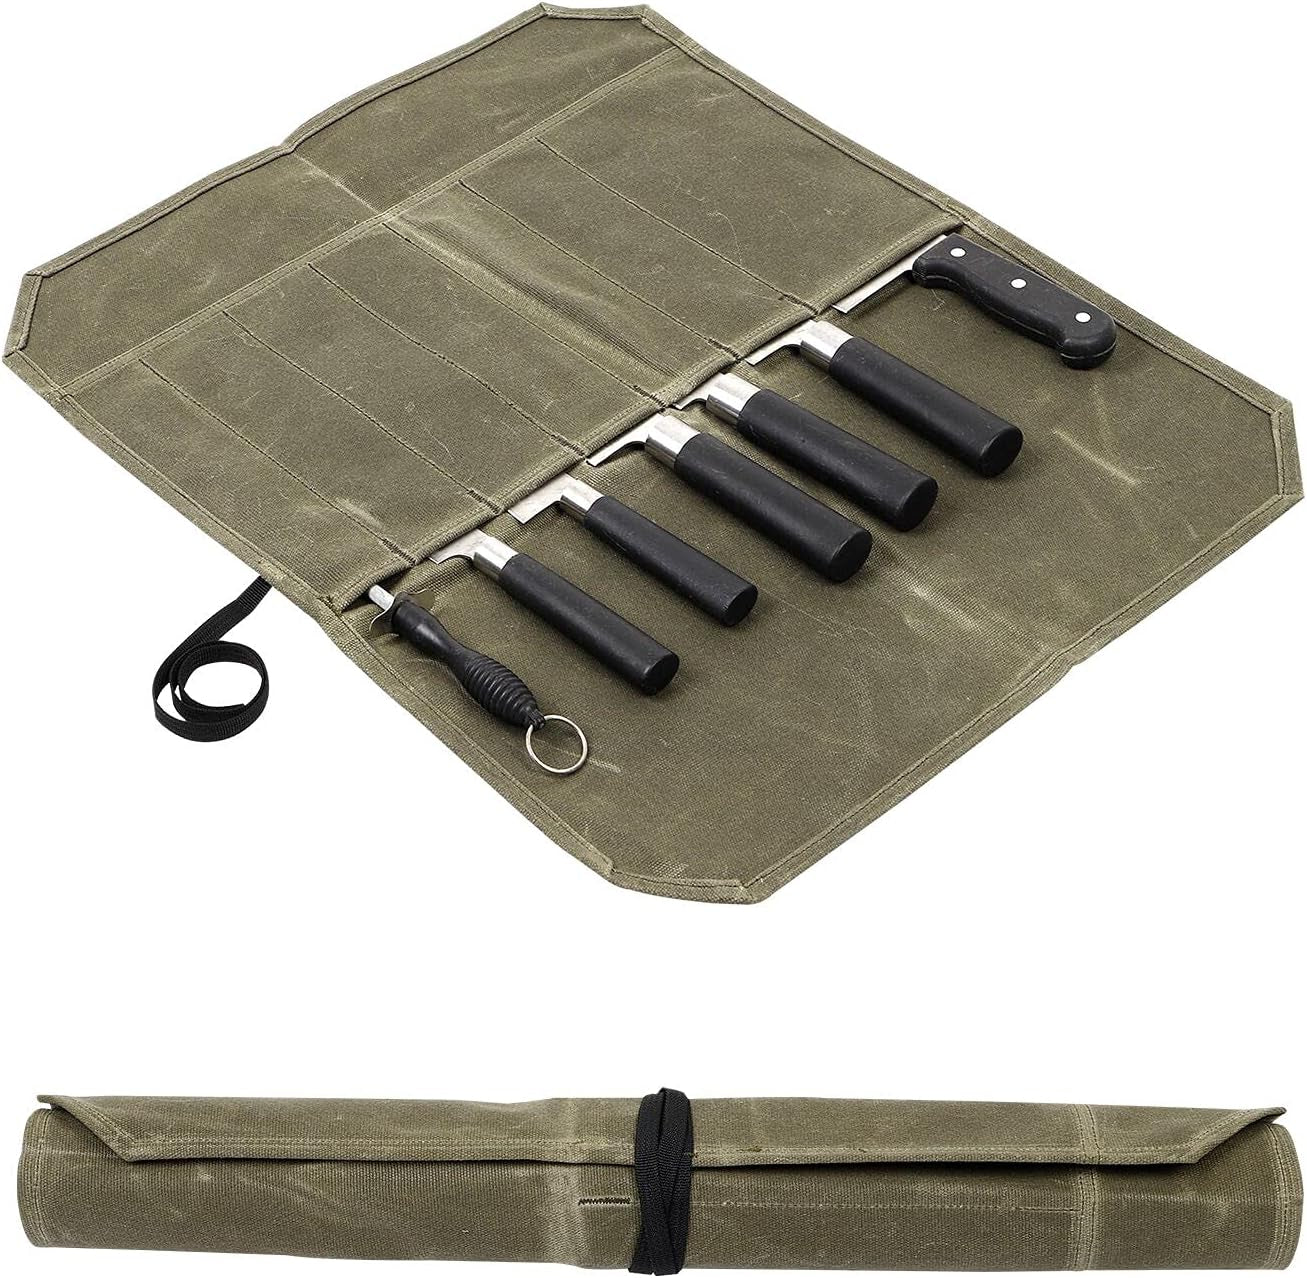 Knife Roll, Chef’S Knife Roll Bag, Waxed Canvas Knife Roll Case